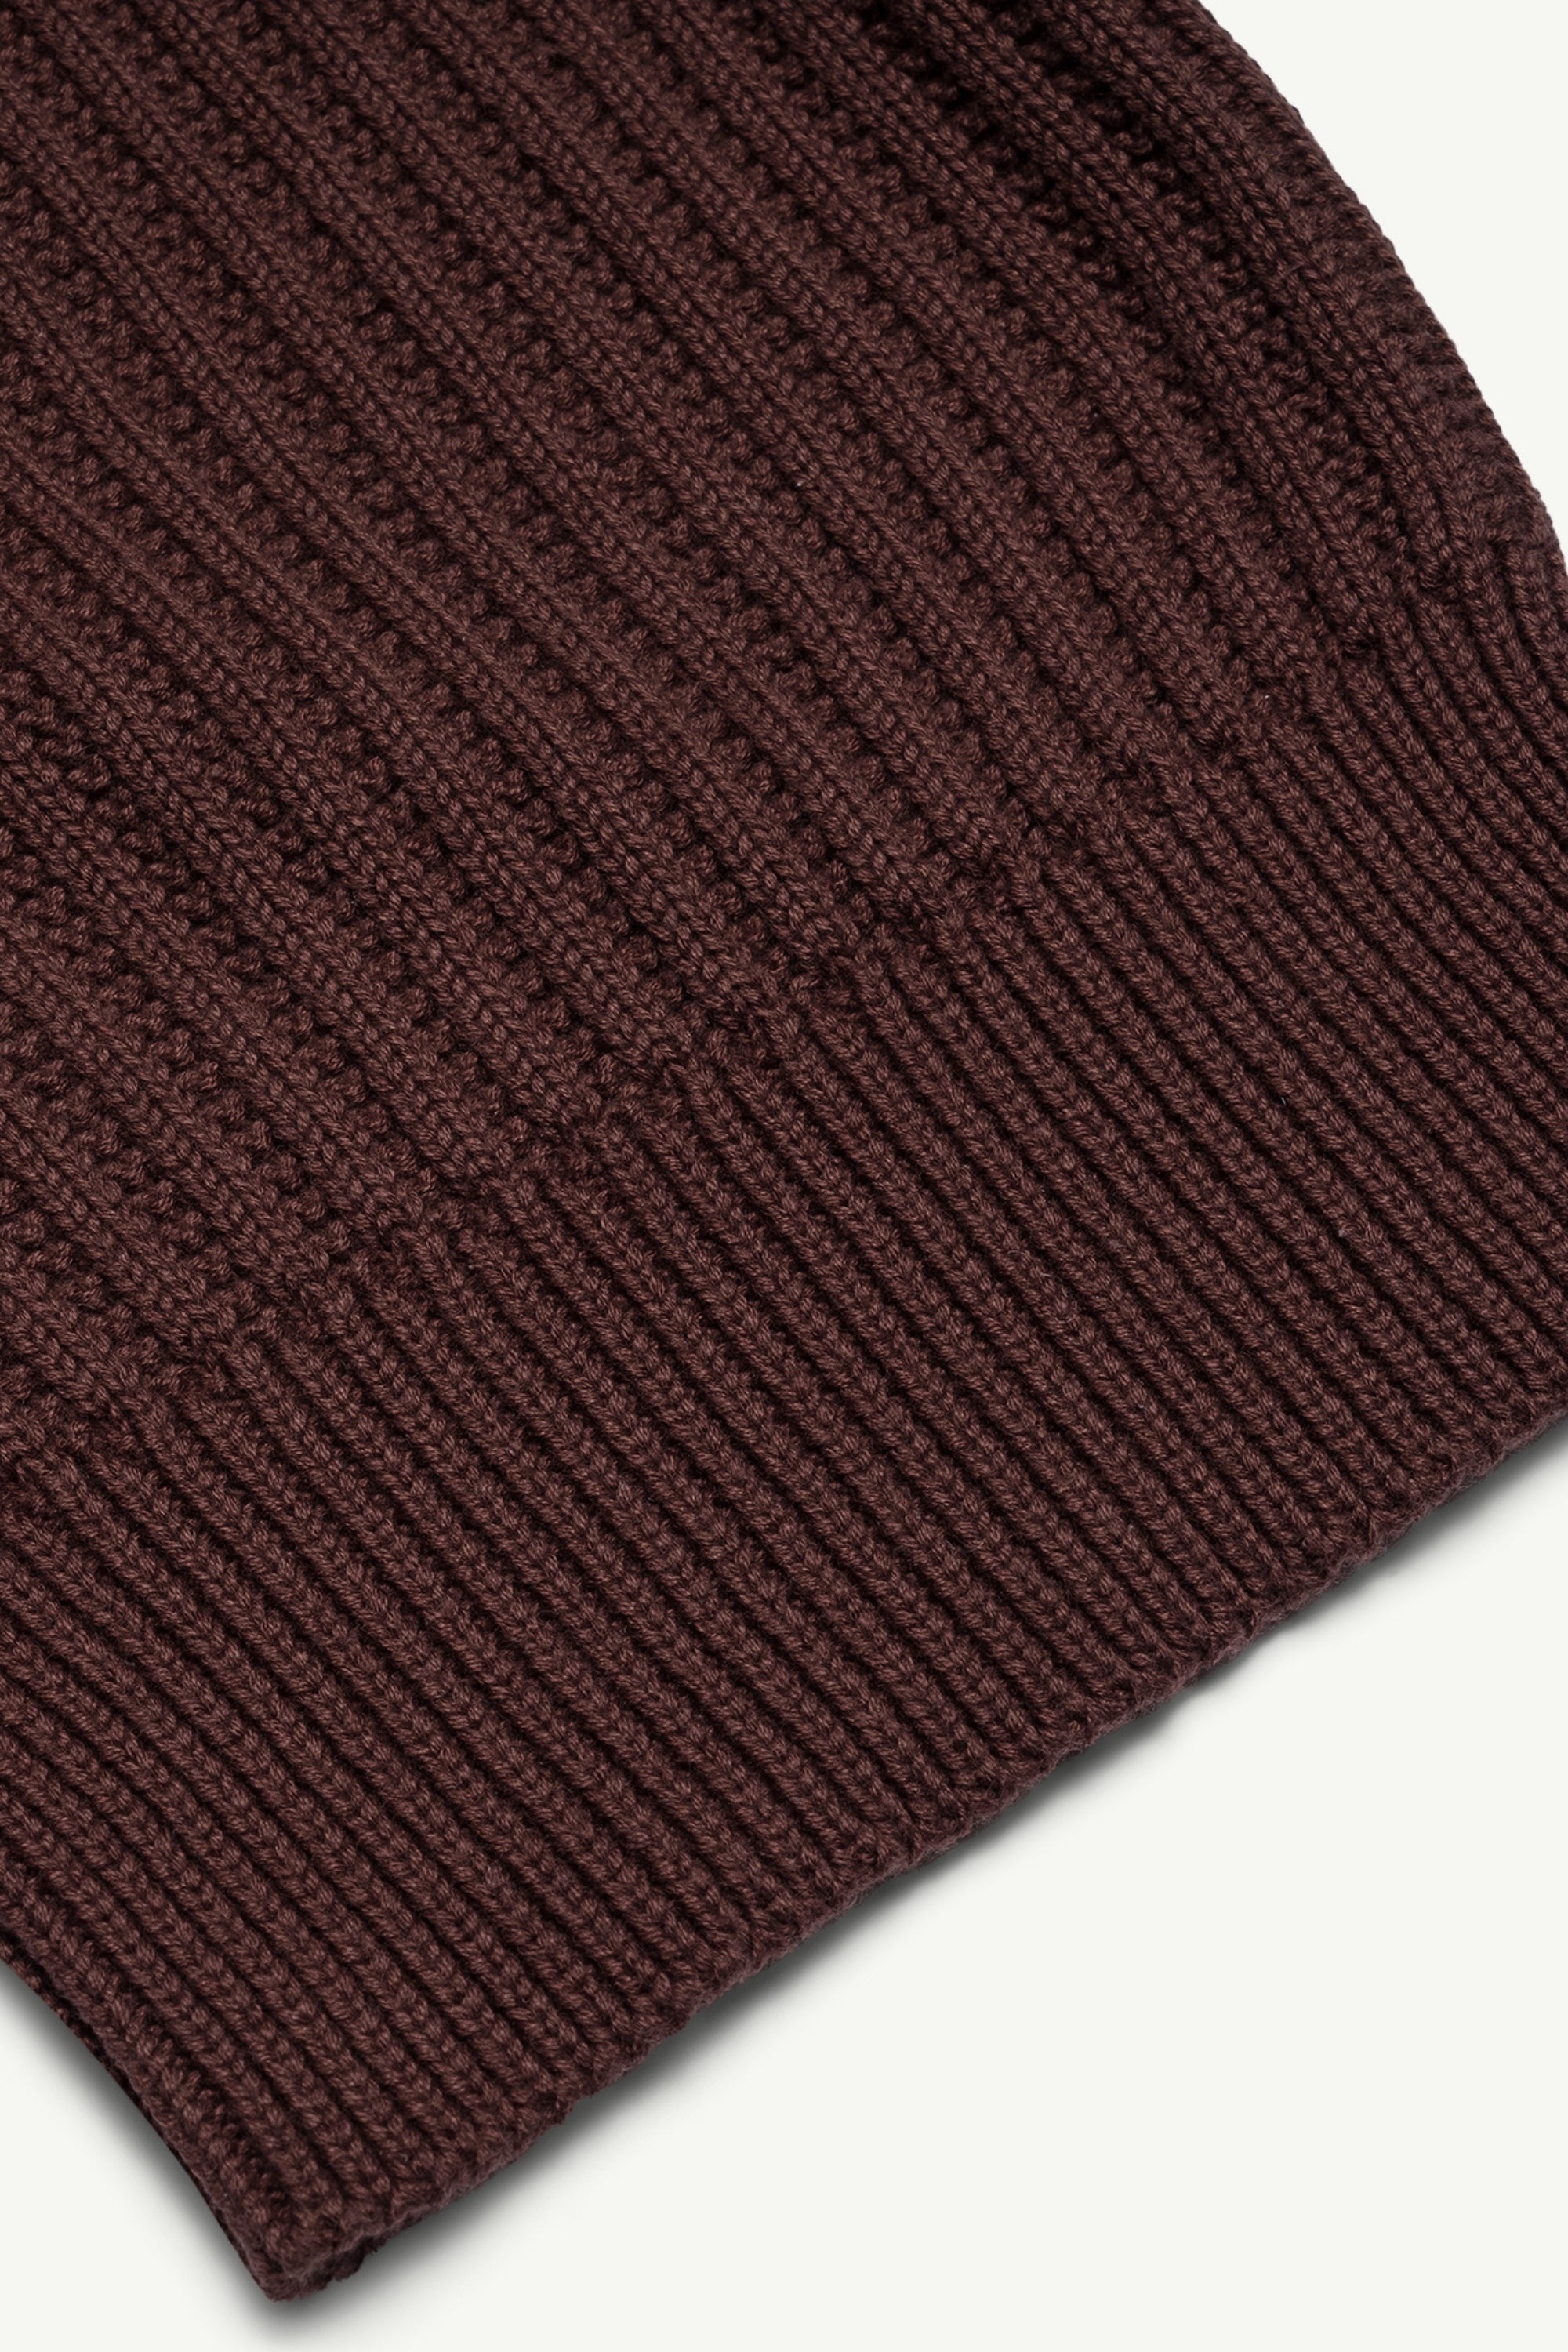 Knit Balaclava - Dark Brown Accessories Veiled Collection 